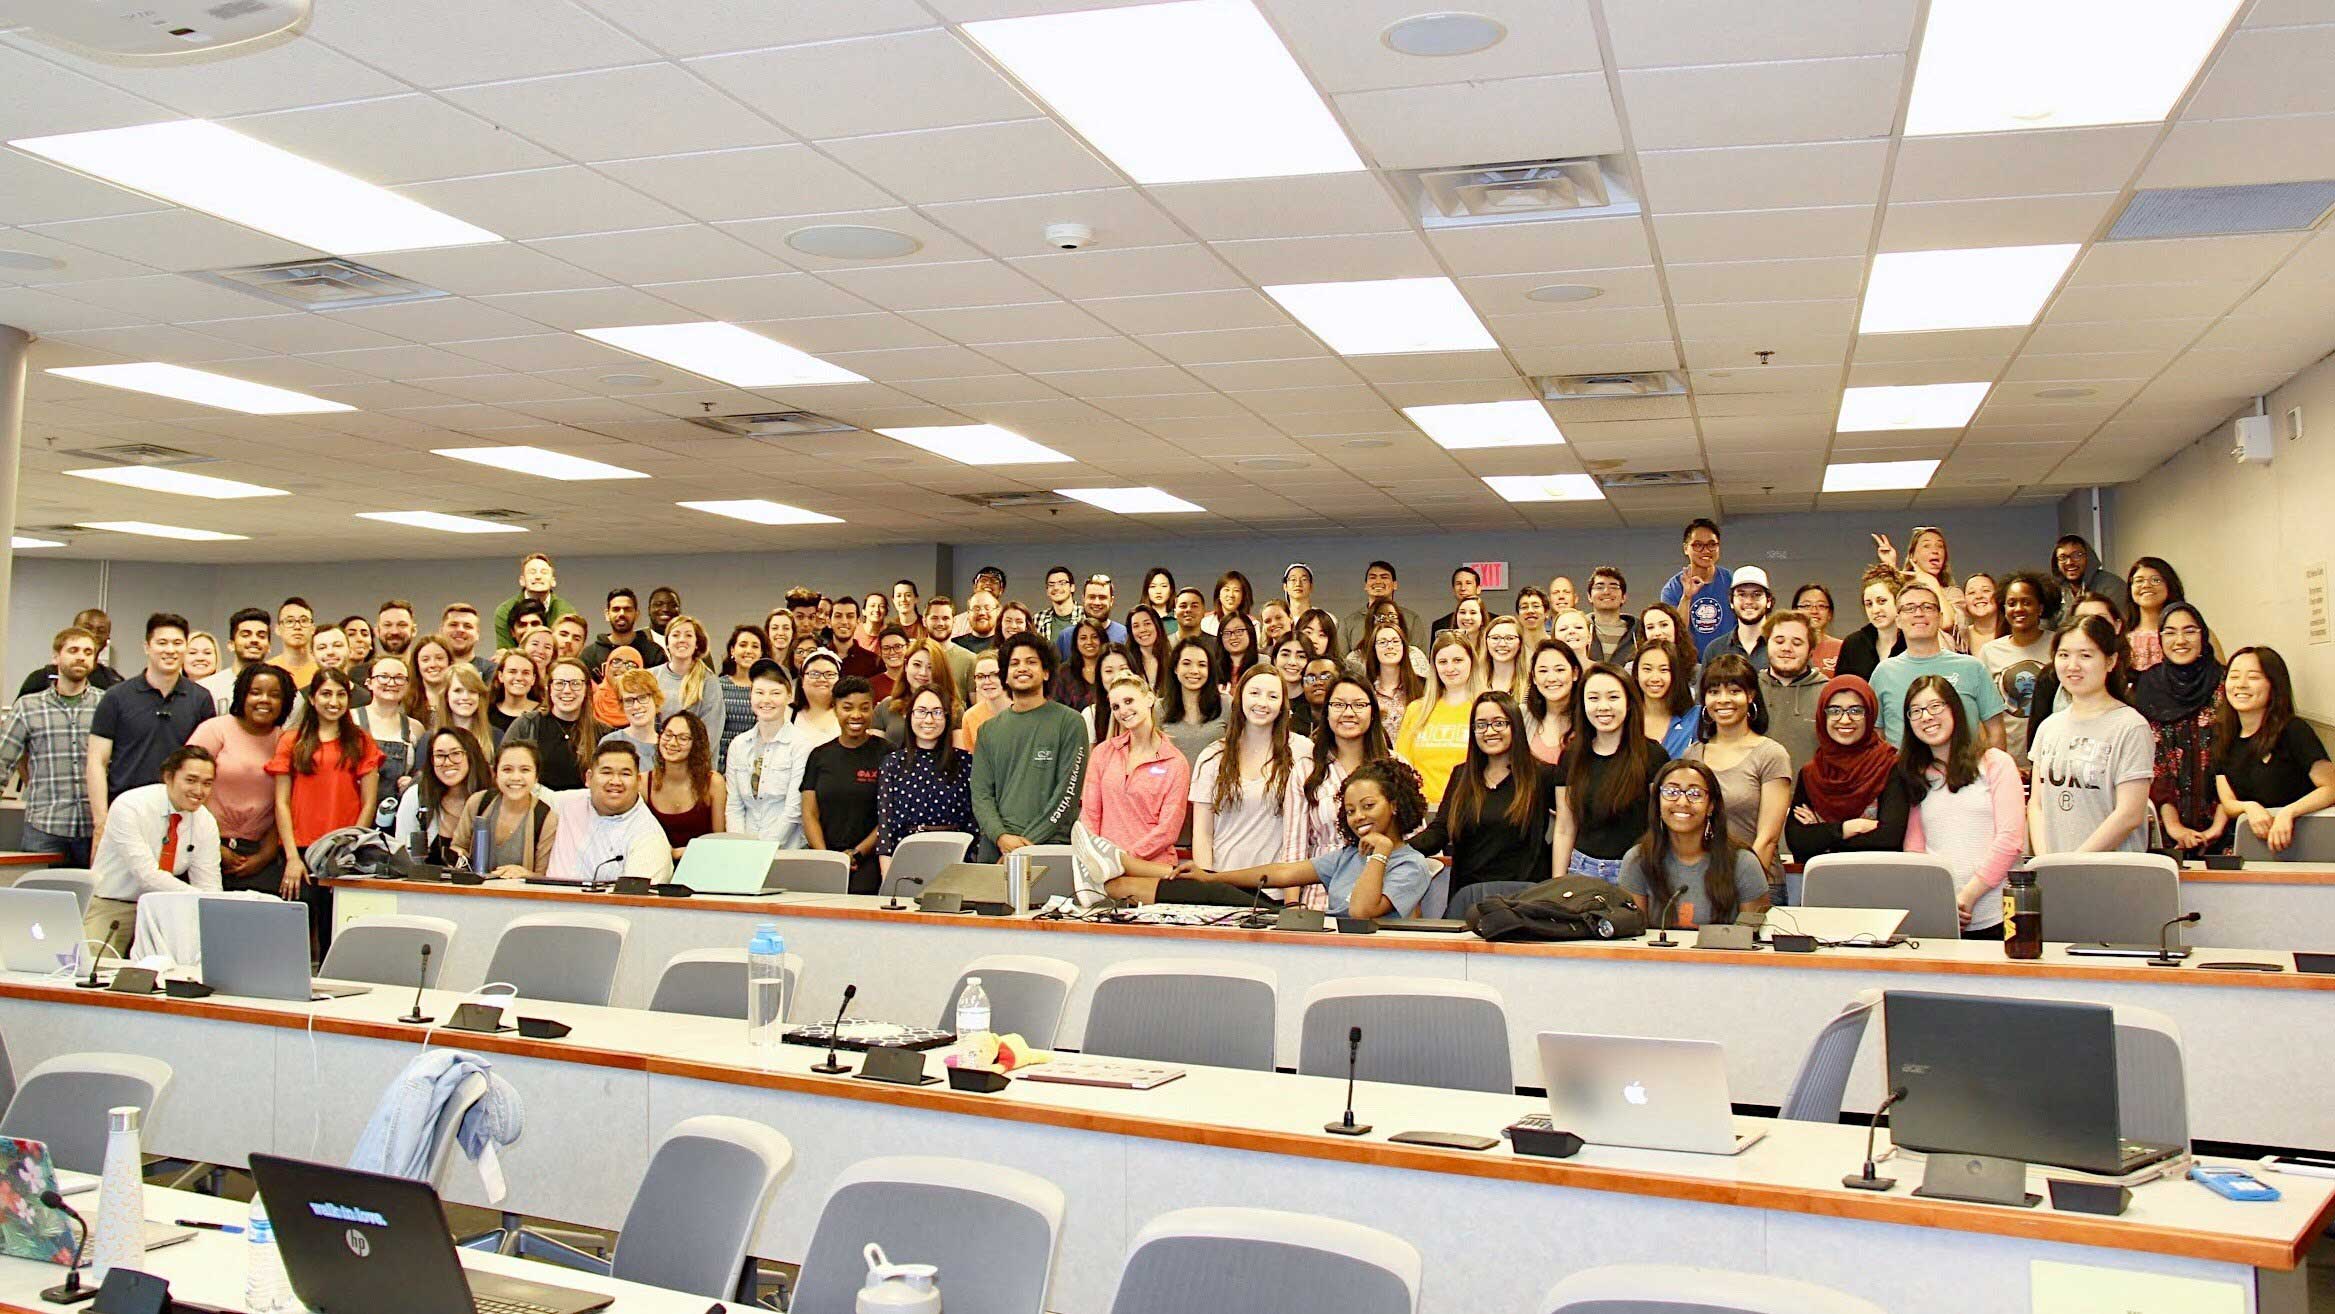 Large group of Pharmacy students in a lecture hall